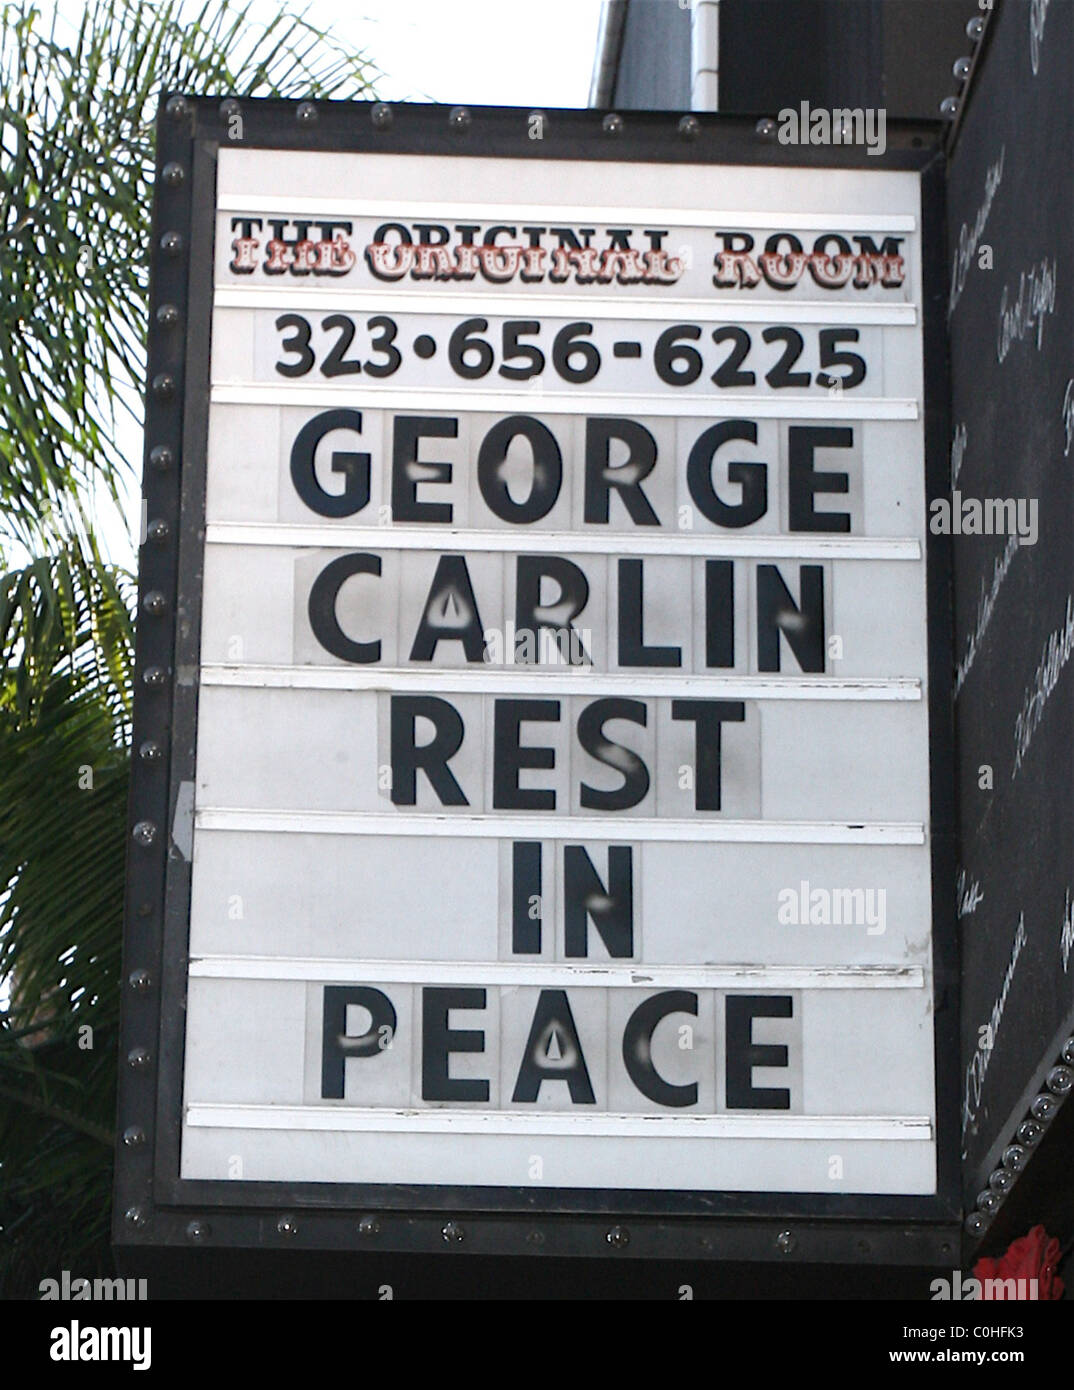 The Comedy Store on Sunset Blvd pays tribute to the great comedian George Carlin after the announcement of his death Los Stock Photo